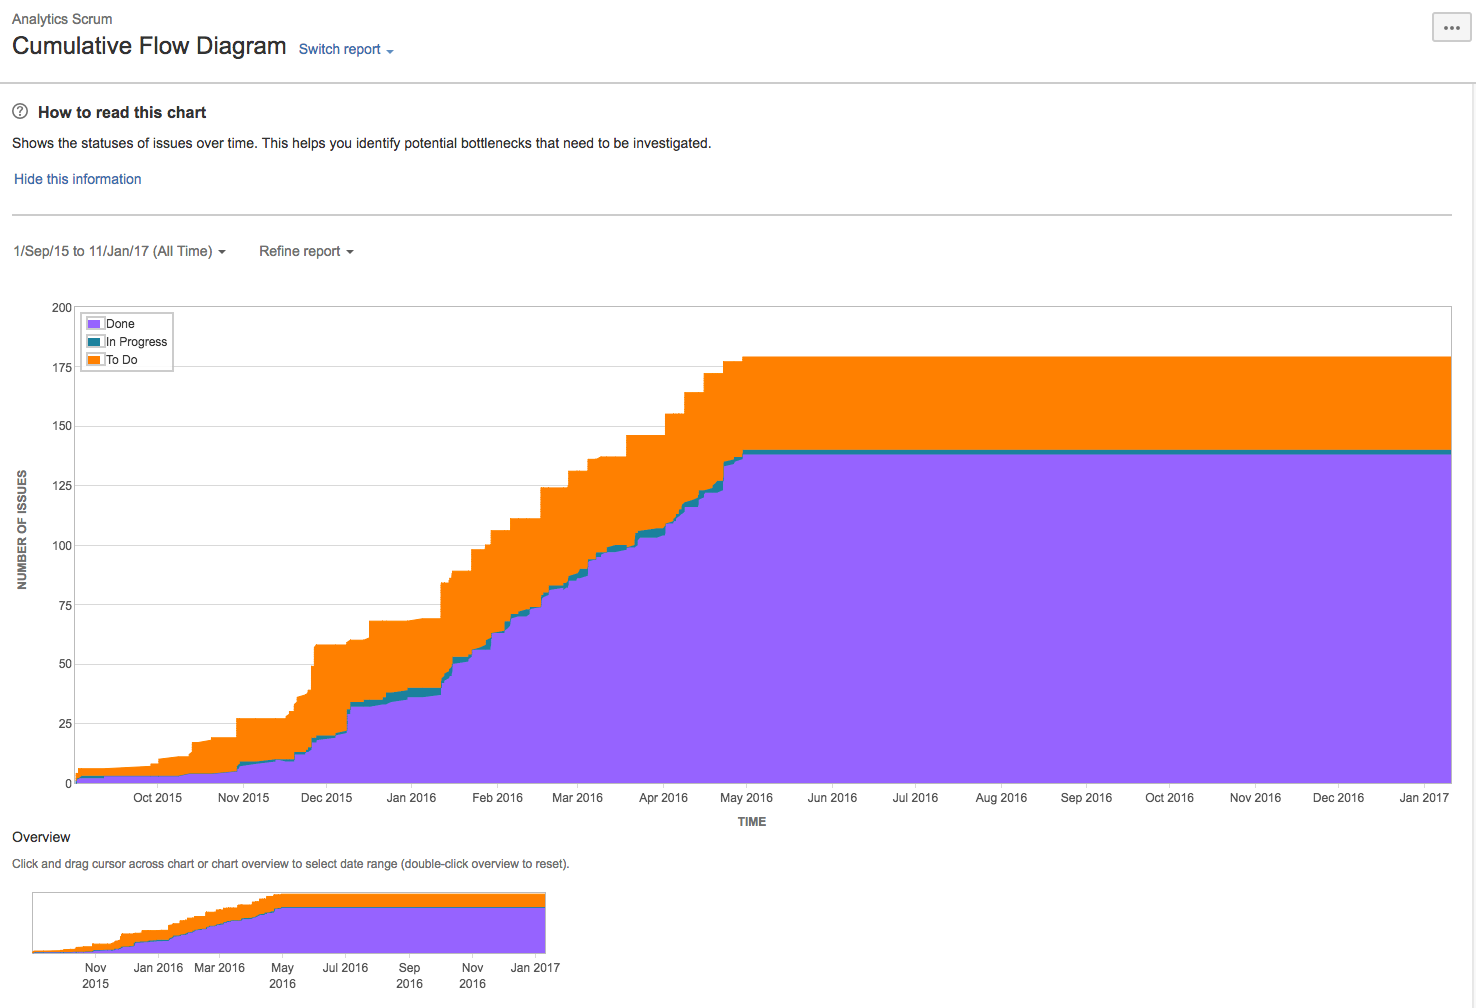 The cumulative flow diagram presents the status of issues over time. Purple = done, green = in progress, orange = to do.